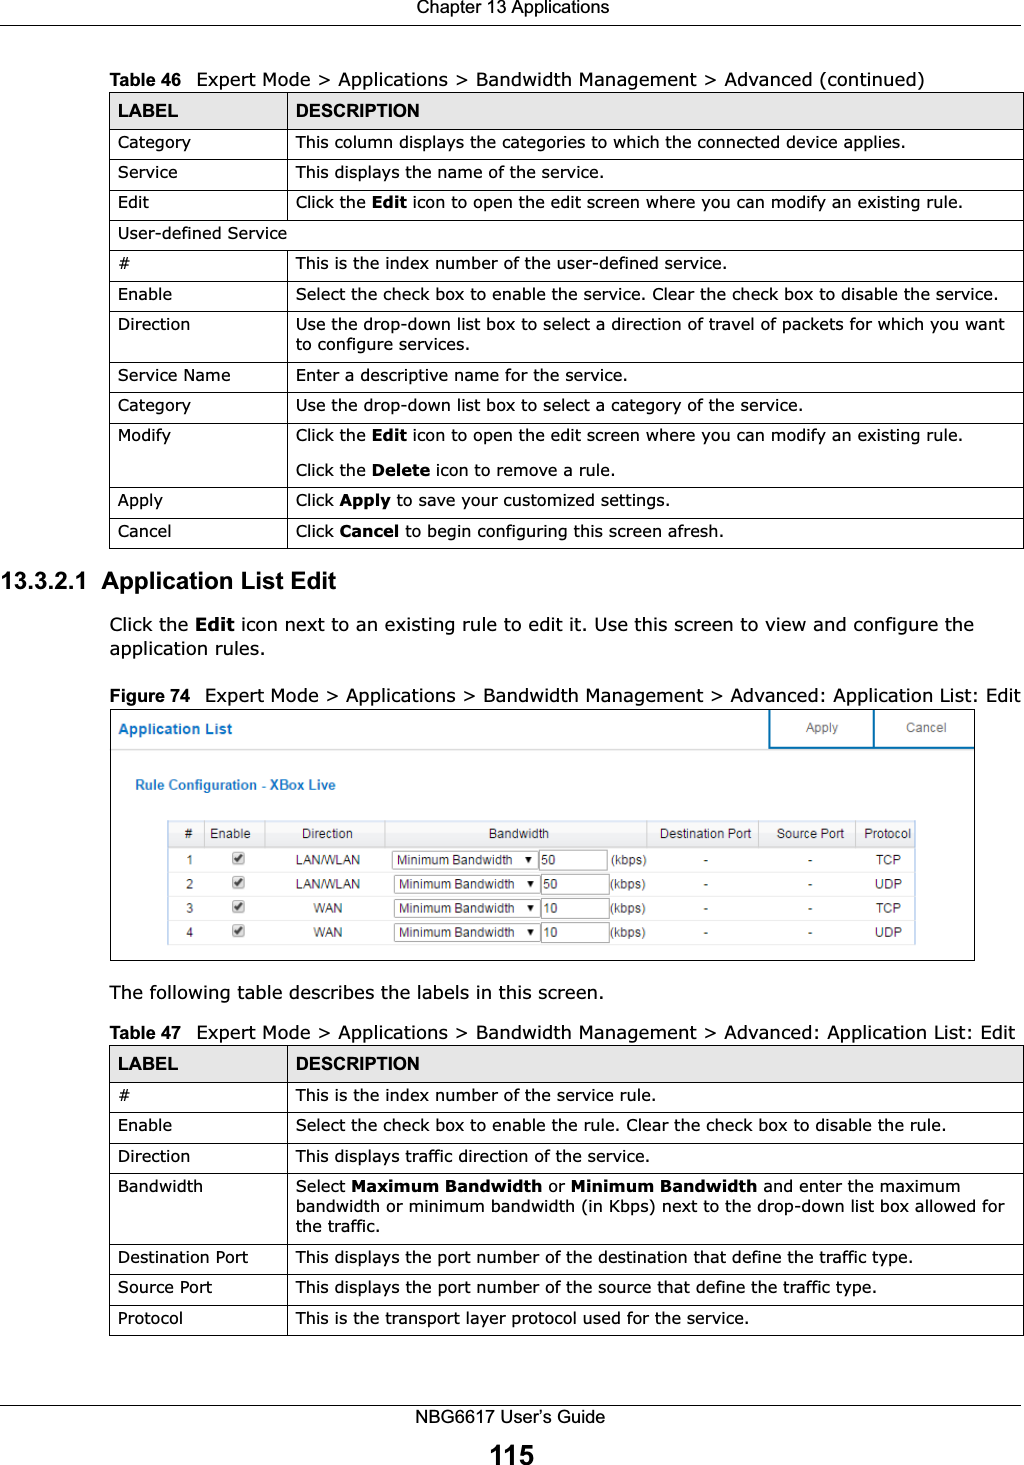  Chapter 13 ApplicationsNBG6617 User’s Guide11513.3.2.1  Application List Edit Click the Edit icon next to an existing rule to edit it. Use this screen to view and configure the application rules.Figure 74   Expert Mode &gt; Applications &gt; Bandwidth Management &gt; Advanced: Application List: EditThe following table describes the labels in this screen.Category This column displays the categories to which the connected device applies.Service This displays the name of the service.Edit Click the Edit icon to open the edit screen where you can modify an existing rule. User-defined Service#This is the index number of the user-defined service.Enable Select the check box to enable the service. Clear the check box to disable the service.Direction Use the drop-down list box to select a direction of travel of packets for which you want to configure services.Service Name Enter a descriptive name for the service.Category Use the drop-down list box to select a category of the service.Modify Click the Edit icon to open the edit screen where you can modify an existing rule. Click the Delete icon to remove a rule.Apply Click Apply to save your customized settings.Cancel Click Cancel to begin configuring this screen afresh.Table 46   Expert Mode &gt; Applications &gt; Bandwidth Management &gt; Advanced (continued)LABEL DESCRIPTIONTable 47   Expert Mode &gt; Applications &gt; Bandwidth Management &gt; Advanced: Application List: EditLABEL DESCRIPTION#This is the index number of the service rule.Enable Select the check box to enable the rule. Clear the check box to disable the rule.Direction This displays traffic direction of the service.Bandwidth Select Maximum Bandwidth or Minimum Bandwidth and enter the maximum bandwidth or minimum bandwidth (in Kbps) next to the drop-down list box allowed for the traffic.Destination Port This displays the port number of the destination that define the traffic type.Source Port This displays the port number of the source that define the traffic type.Protocol This is the transport layer protocol used for the service.